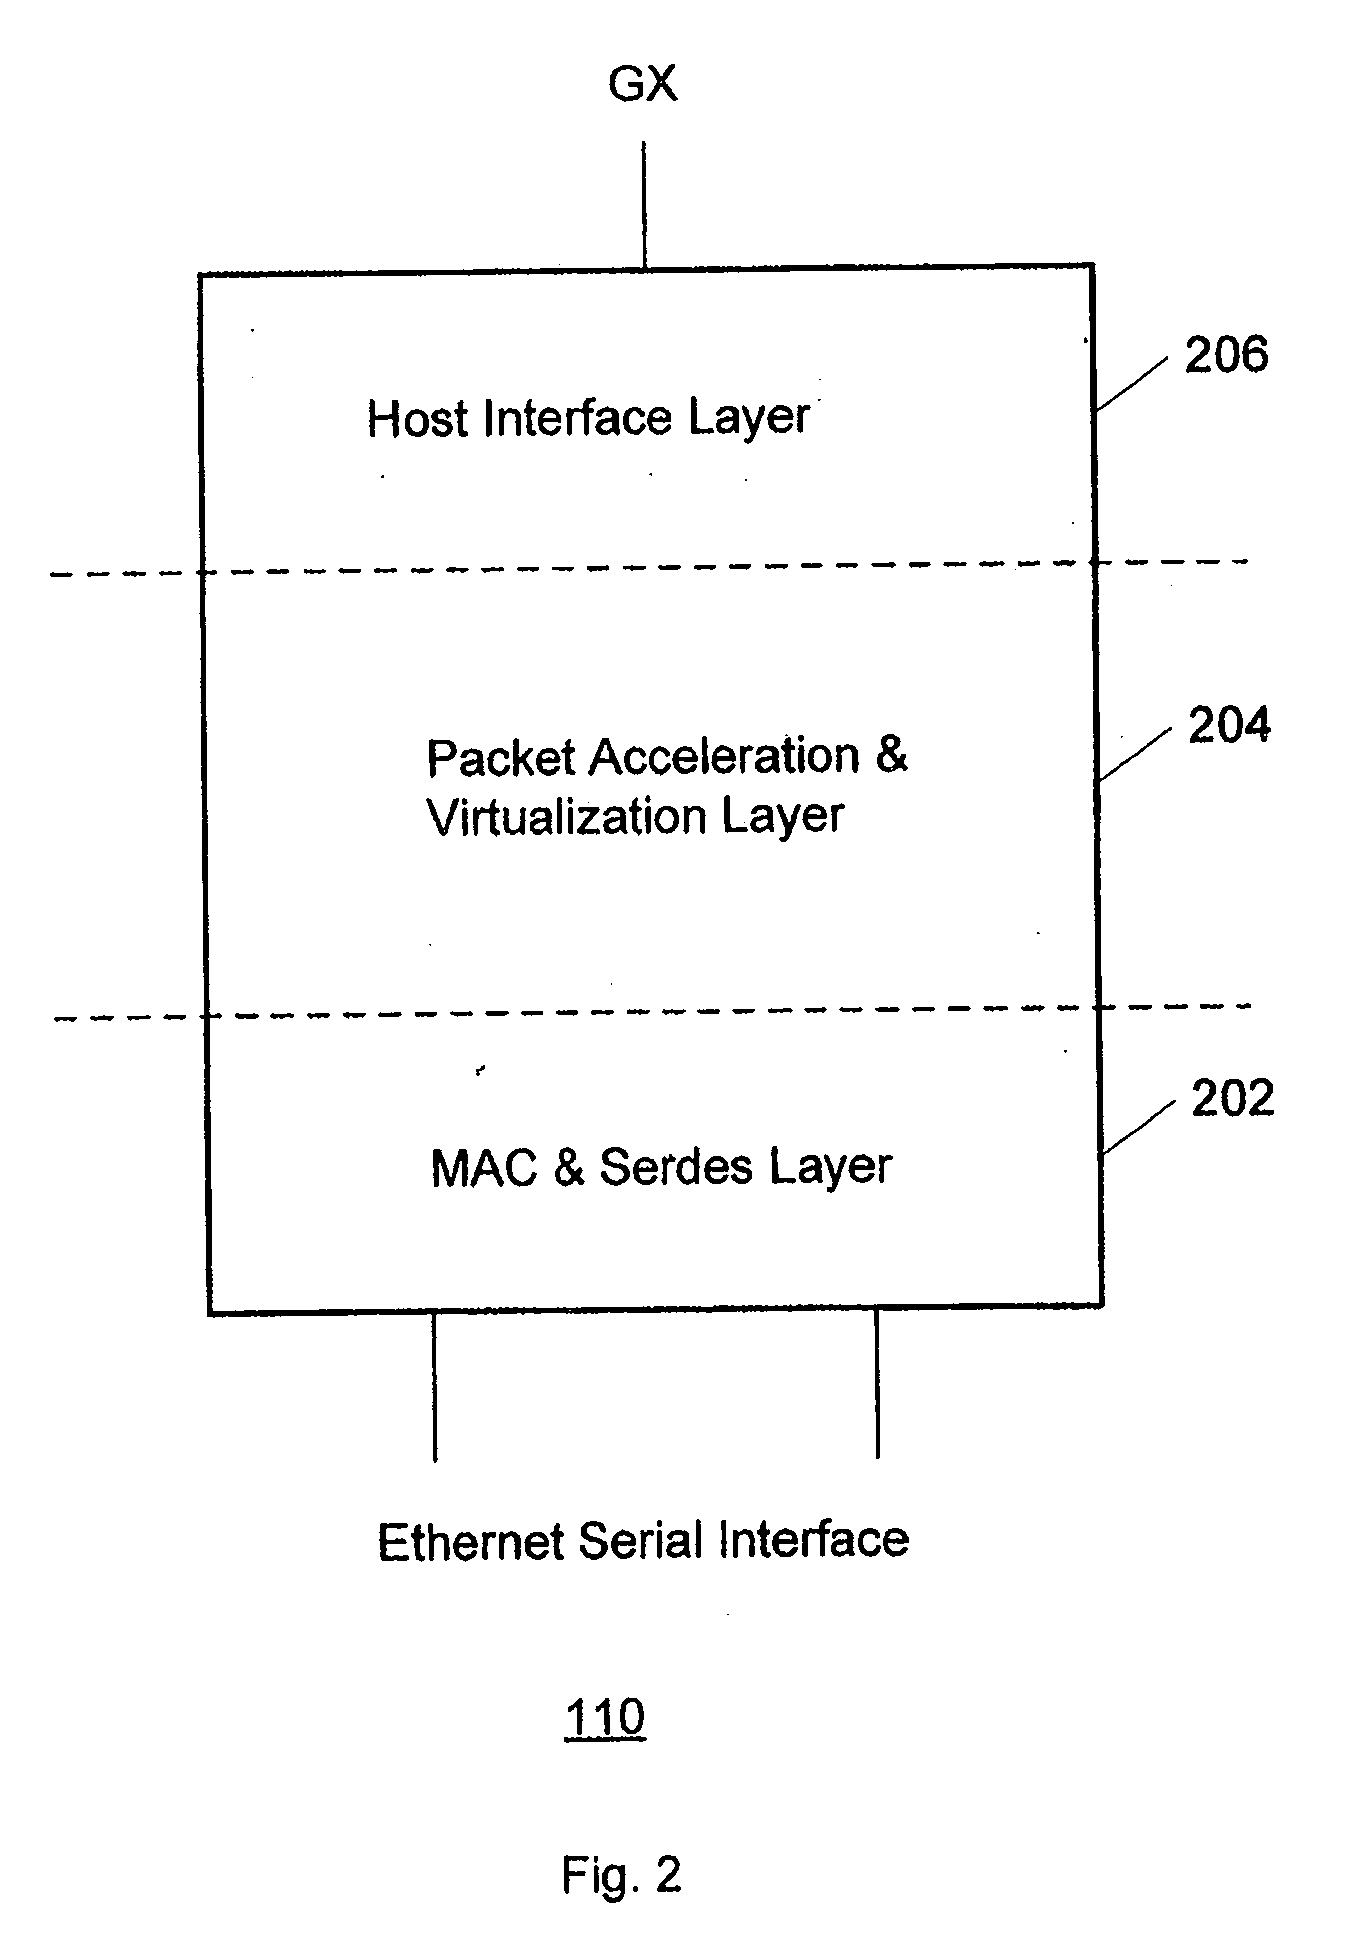 Configurable ports for a host ethernet adapter